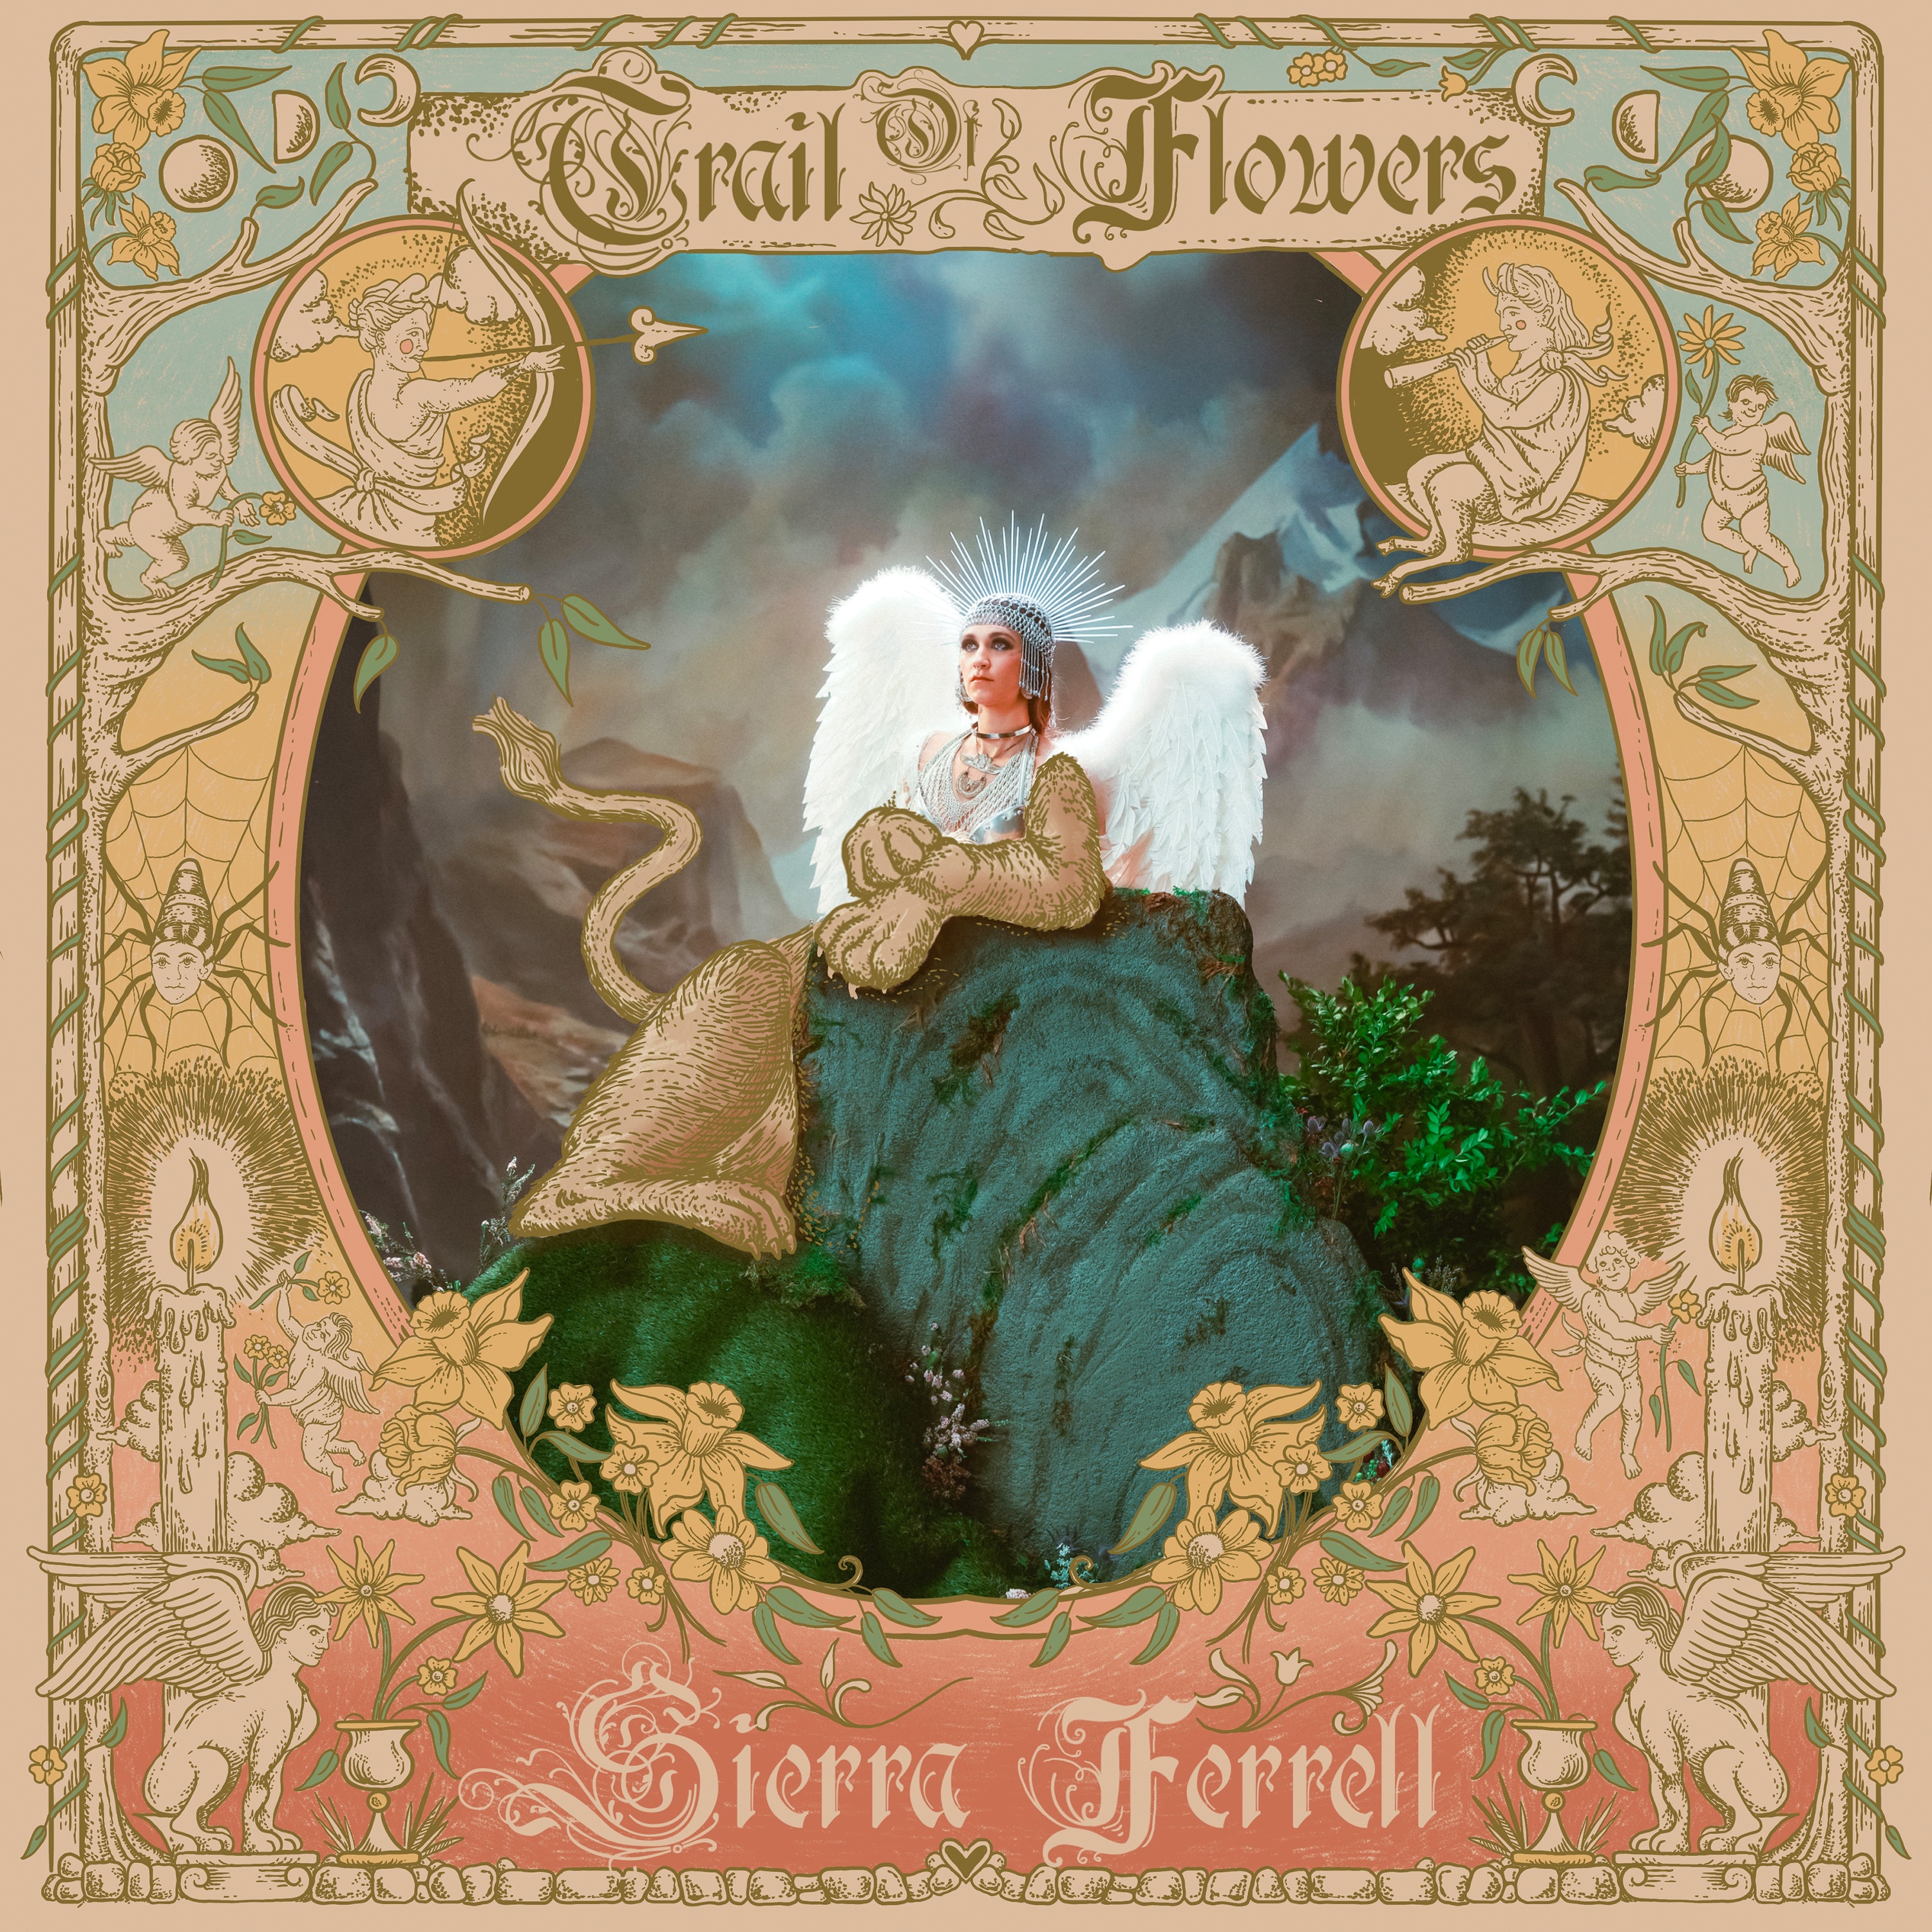 Art deco style illustration of woman as a griffin with elaborate frame and drawings & text: Trail of Flowers Sierra Ferrell